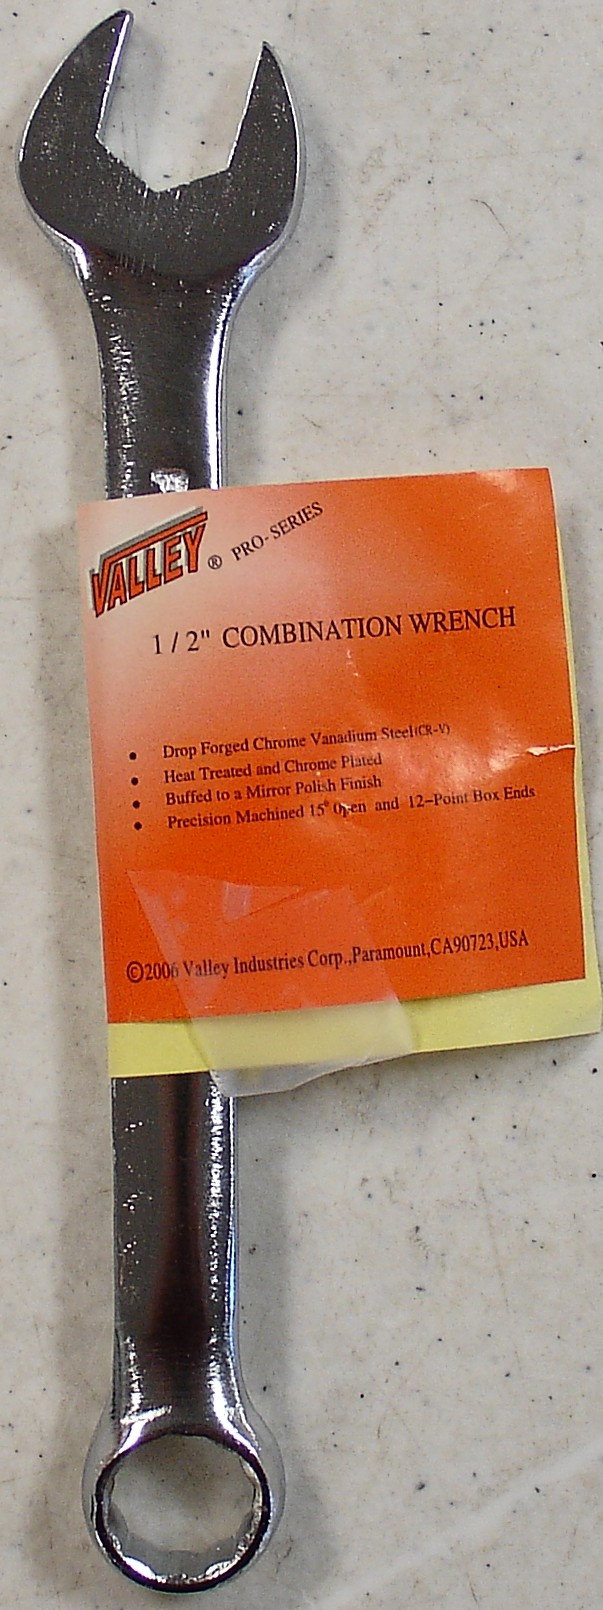 1/2 Combination WRENCH